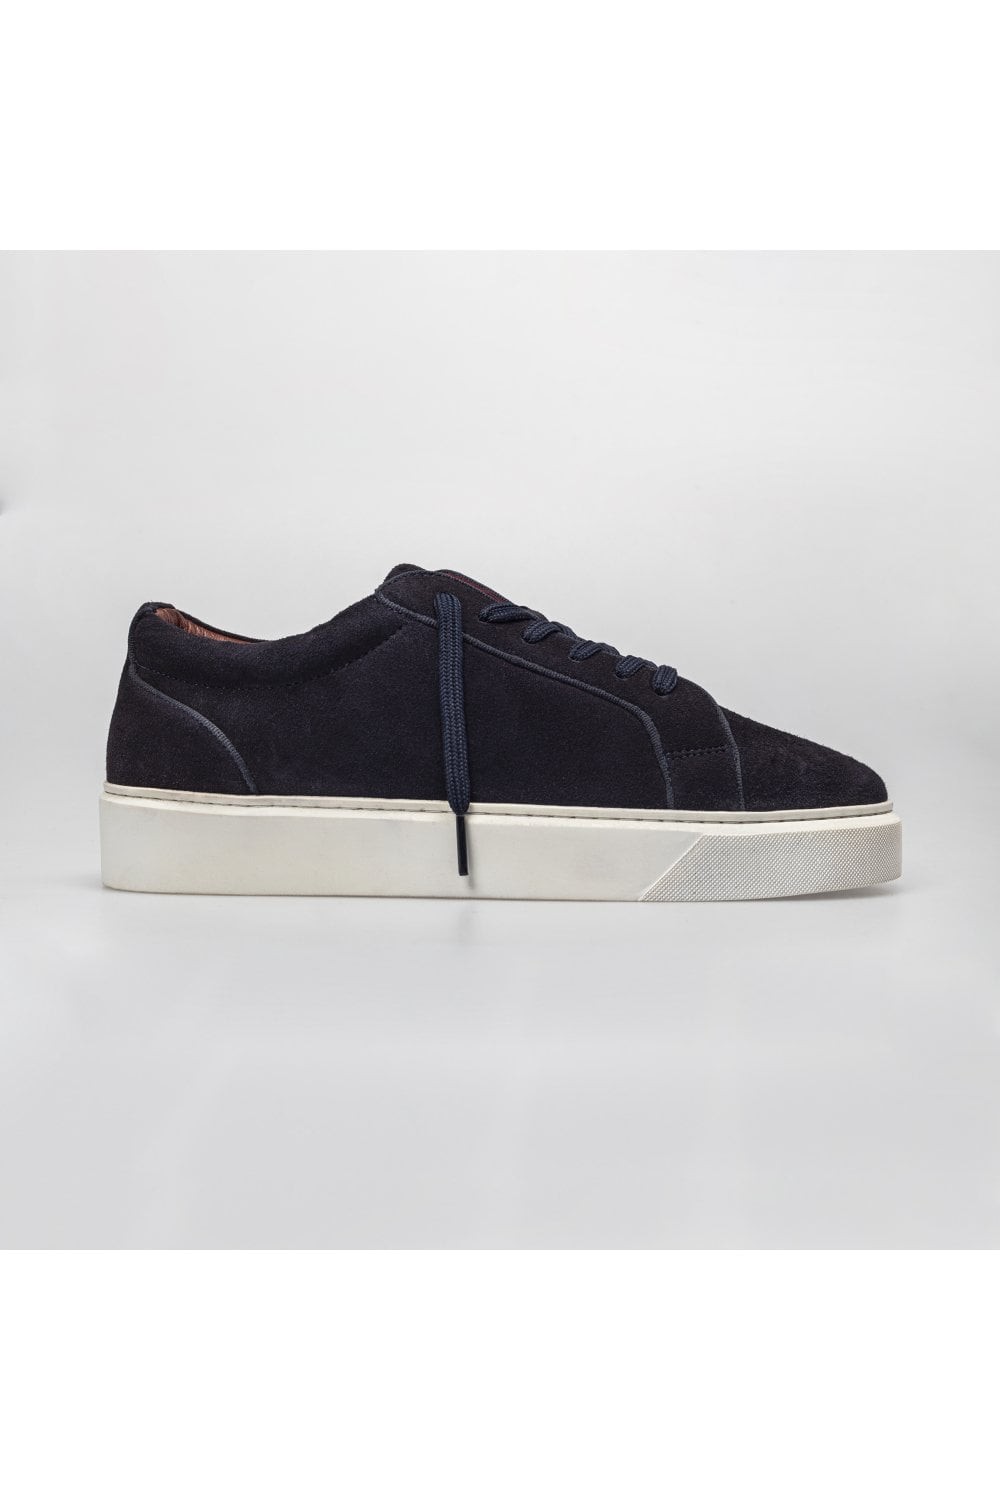 Men's Thick Rubber Sole Lace Up Sneakers - Navy Blue